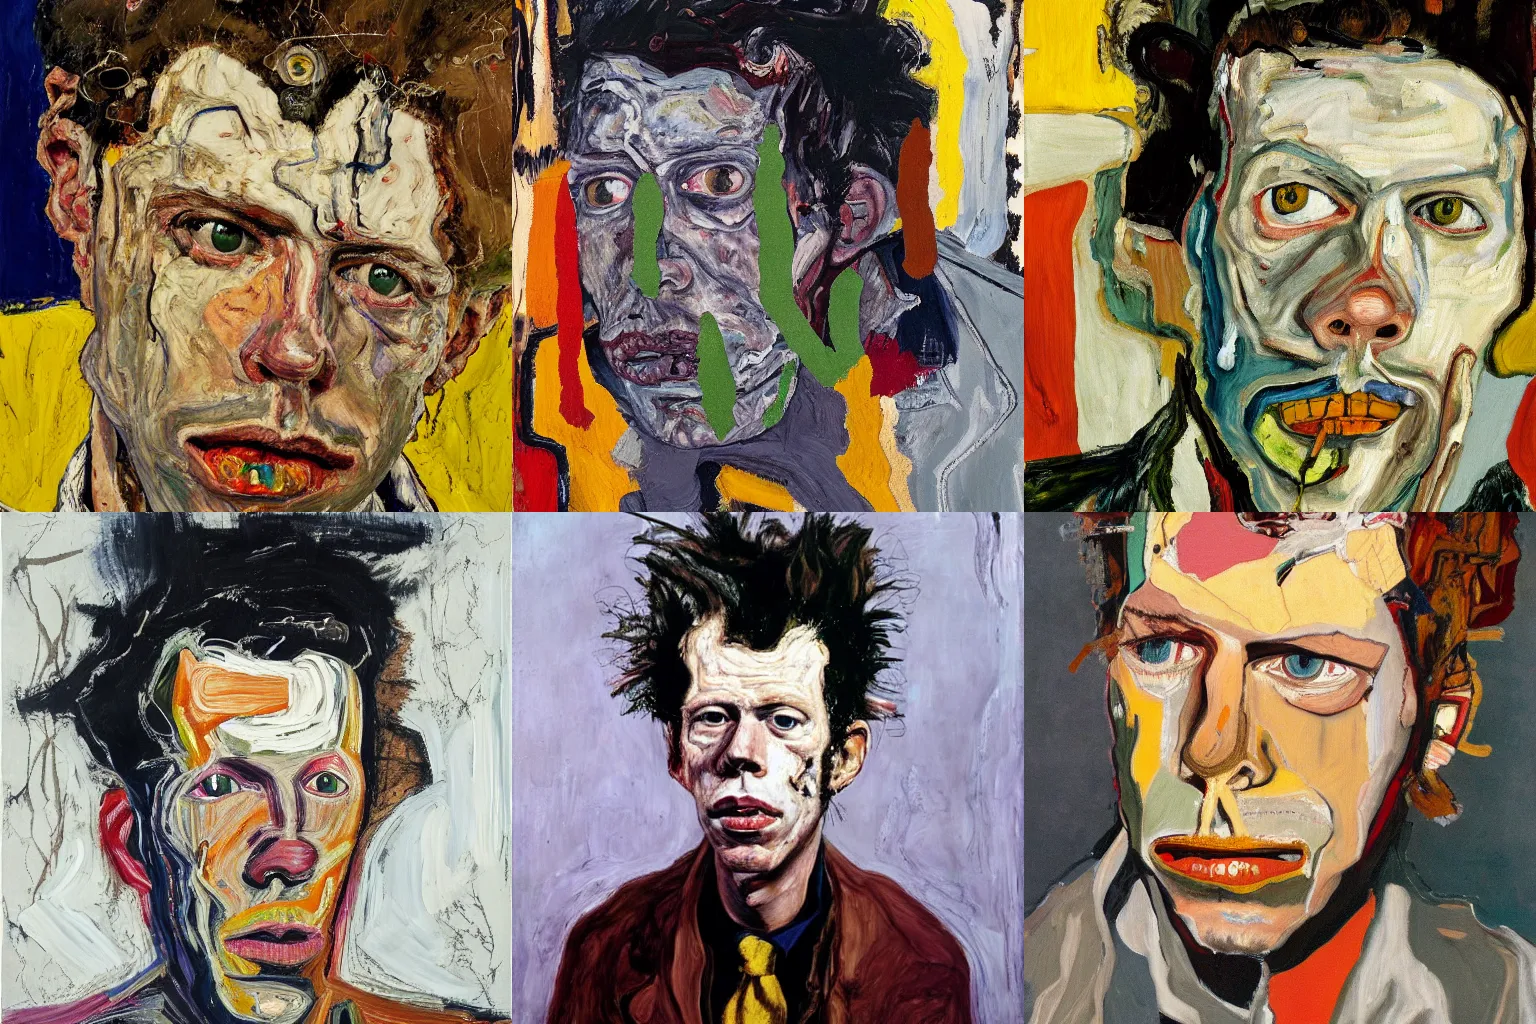 Prompt: oilpainting portrait of tom waits, in the style of lucian freud, by basquiat, by lucian freud, by lucian freud, by lucian freud, by lucian freud, by lucian freud by egon schiele